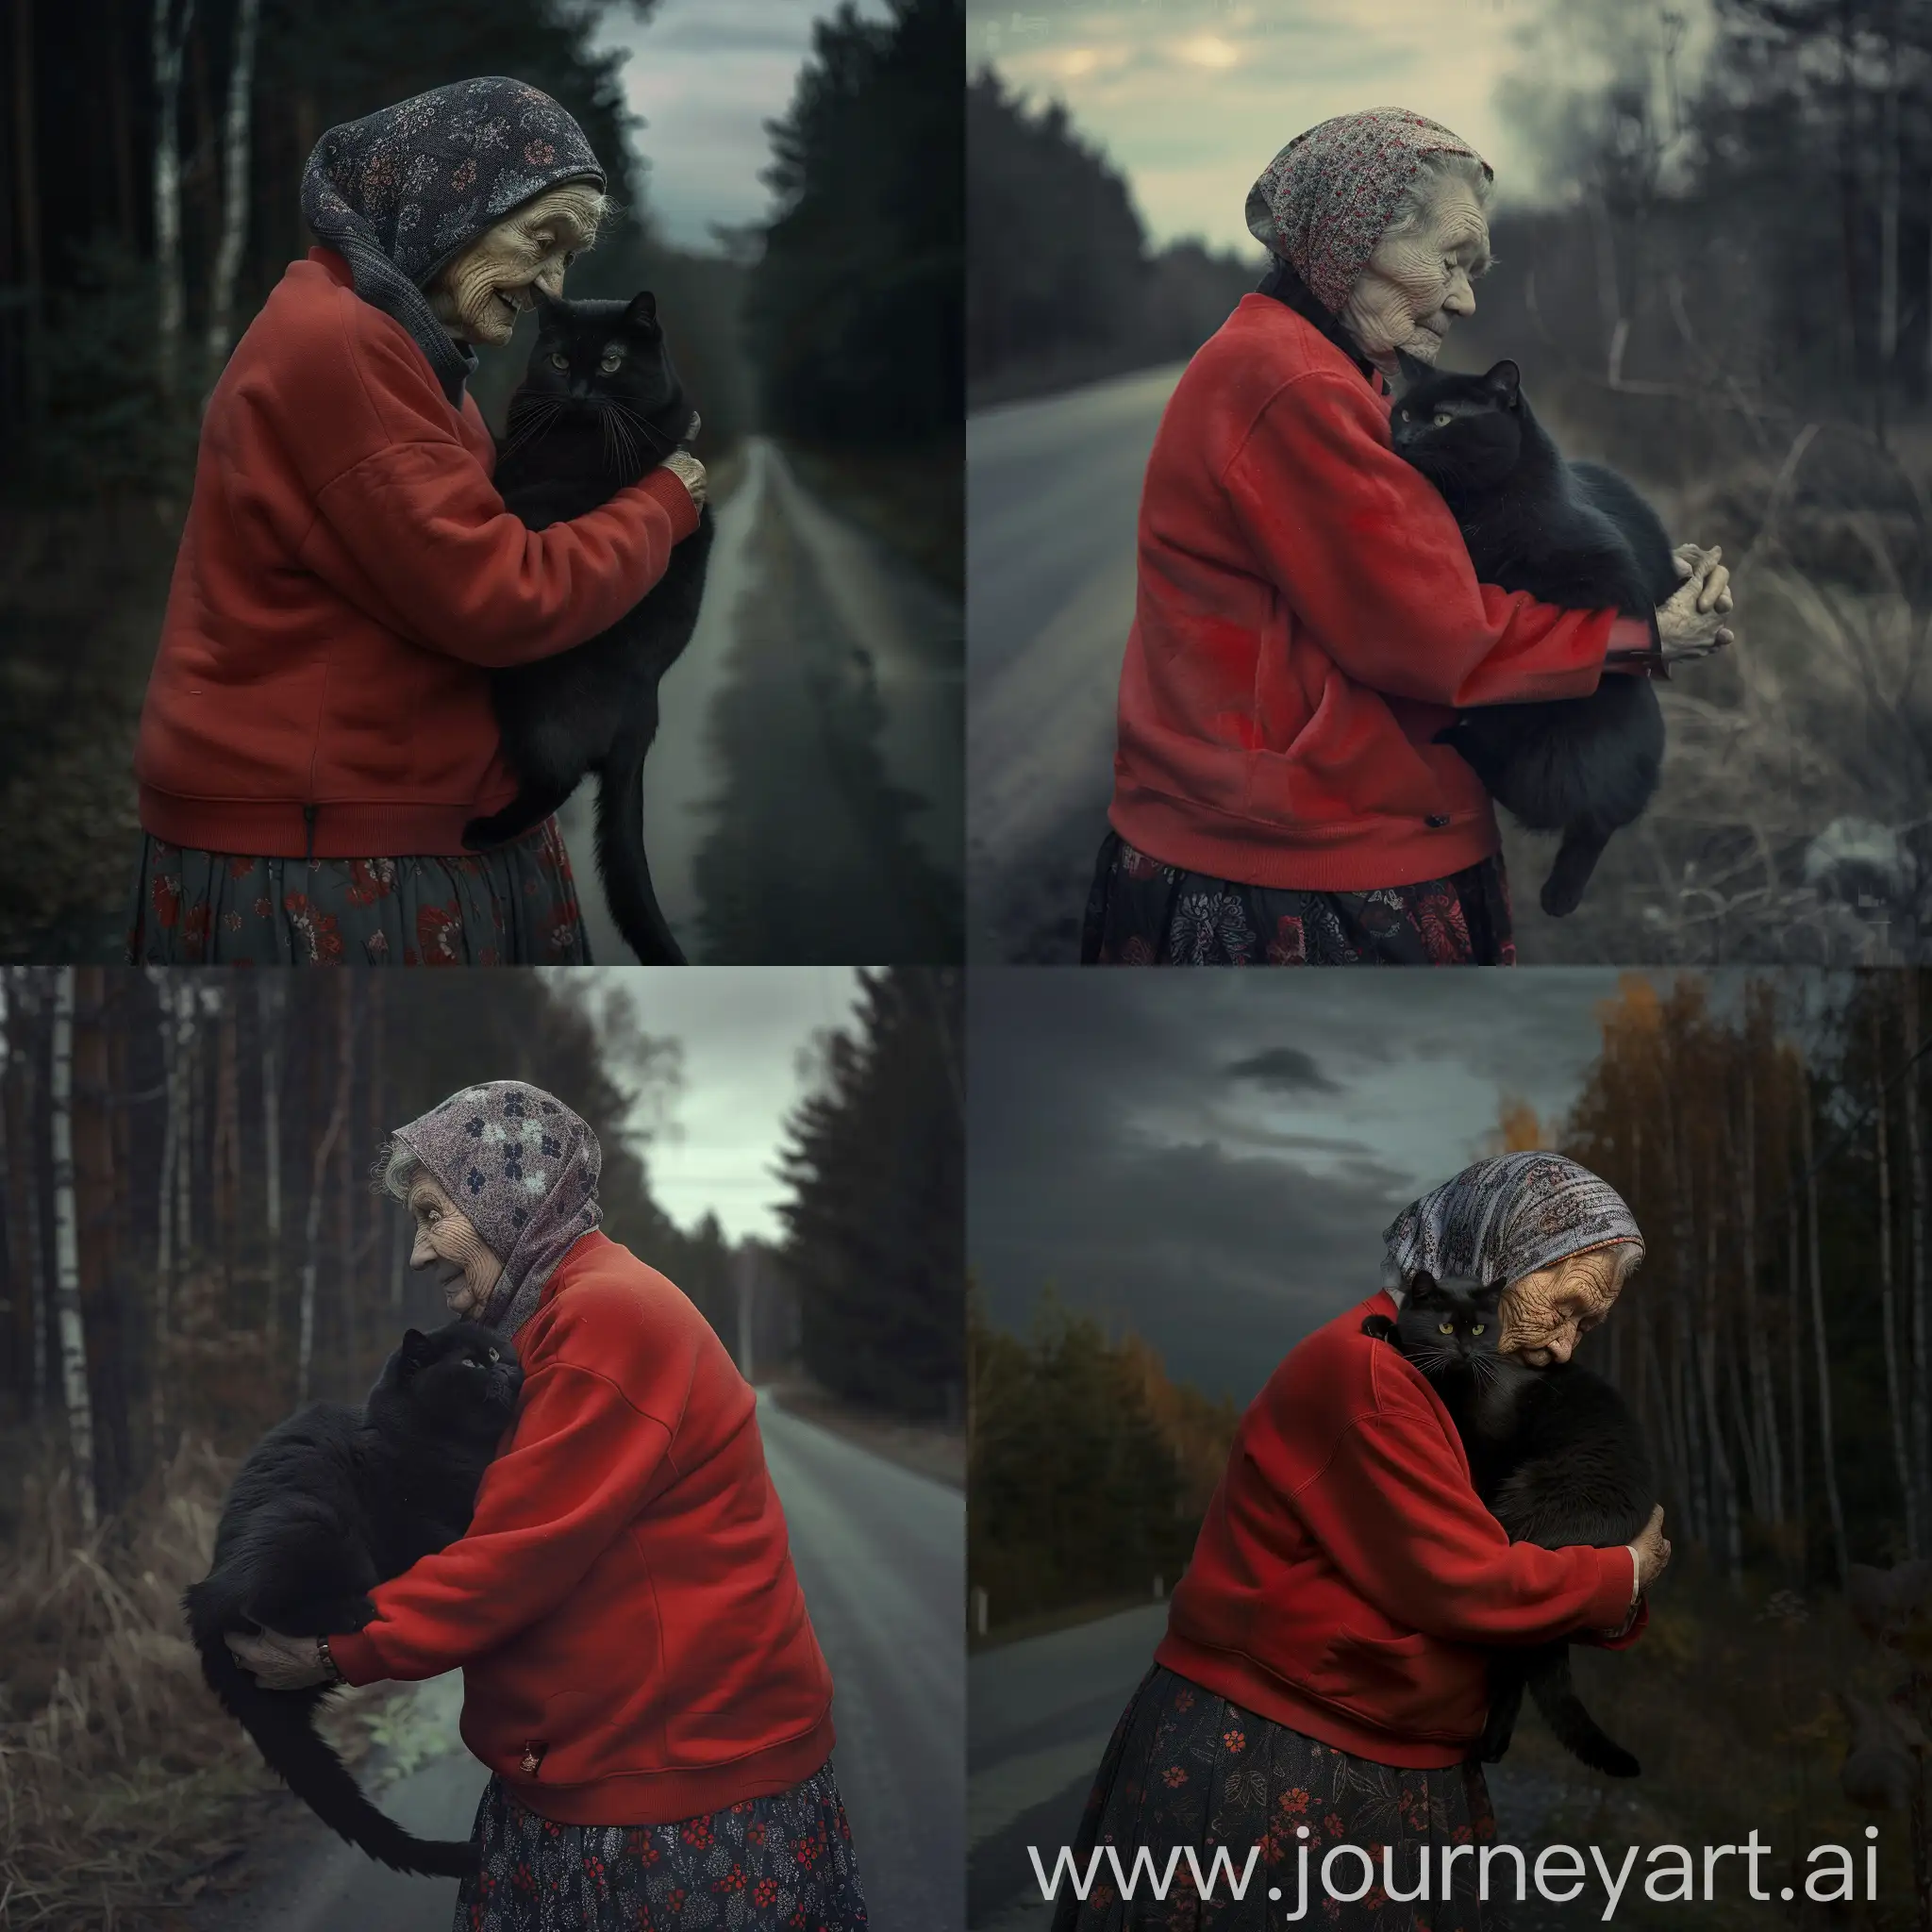 Russian old woman with hunchback, slim, old face with wrinkles, wearing russian babushka headscarf, red sweatshirt, long baggy skirt with flower pattern, cold weather, embracing an ugly creepy black cat, near a road, creepy trees, dark eerie, midnight, dramatic lighting